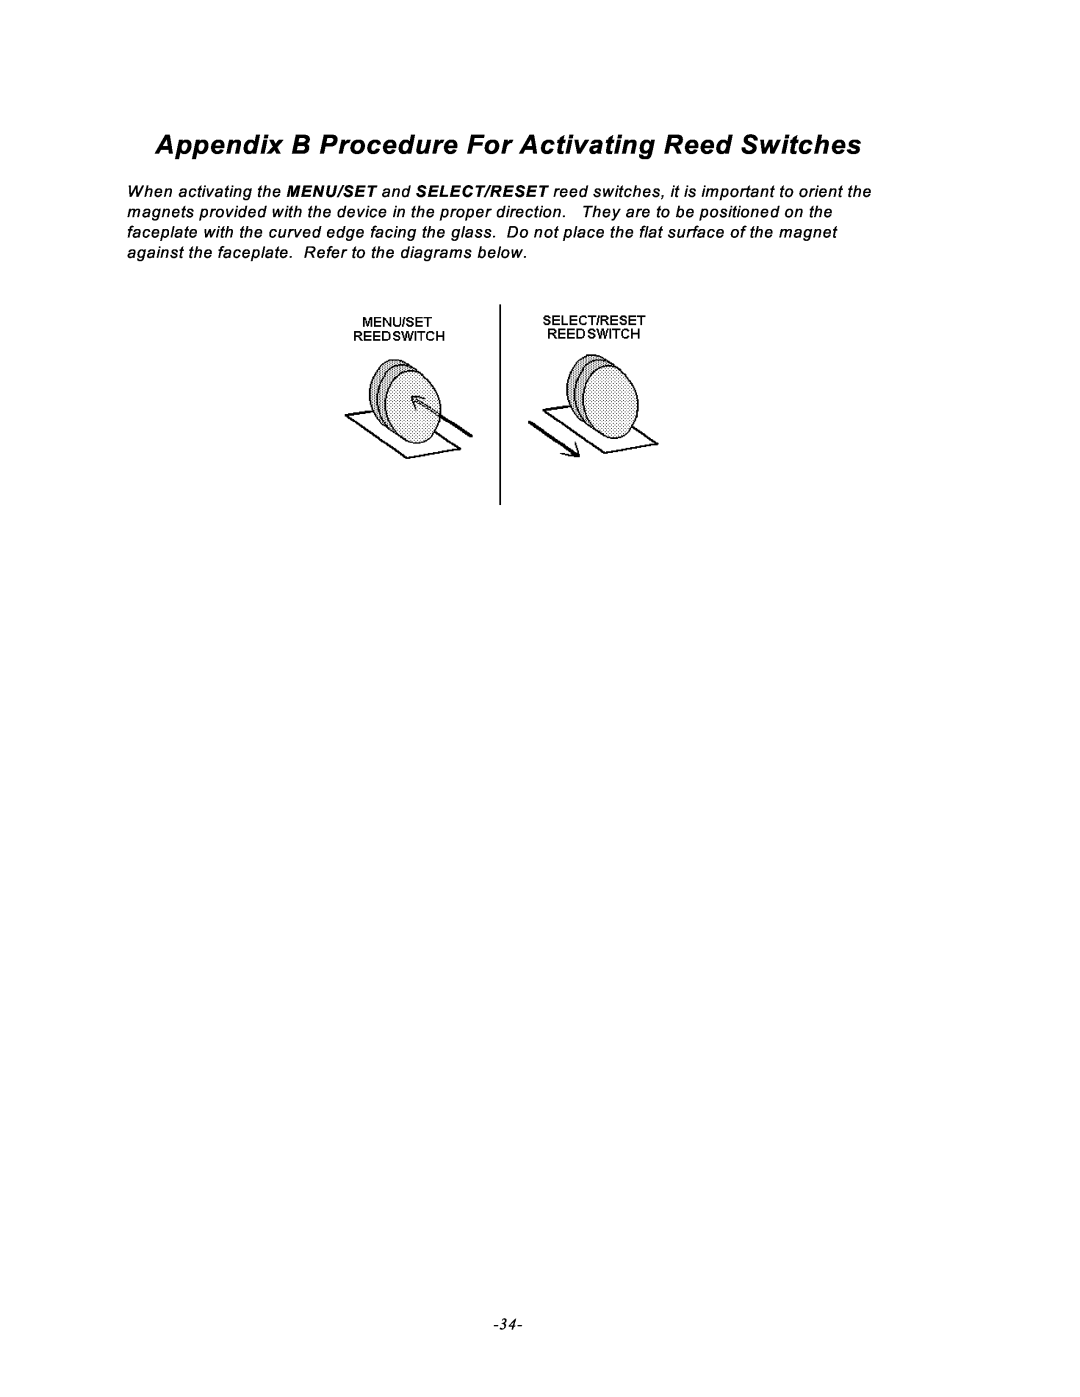 Emerson UVC120, MAN -0016-00 manual Appendix B Procedure For Activating Reed Switches 